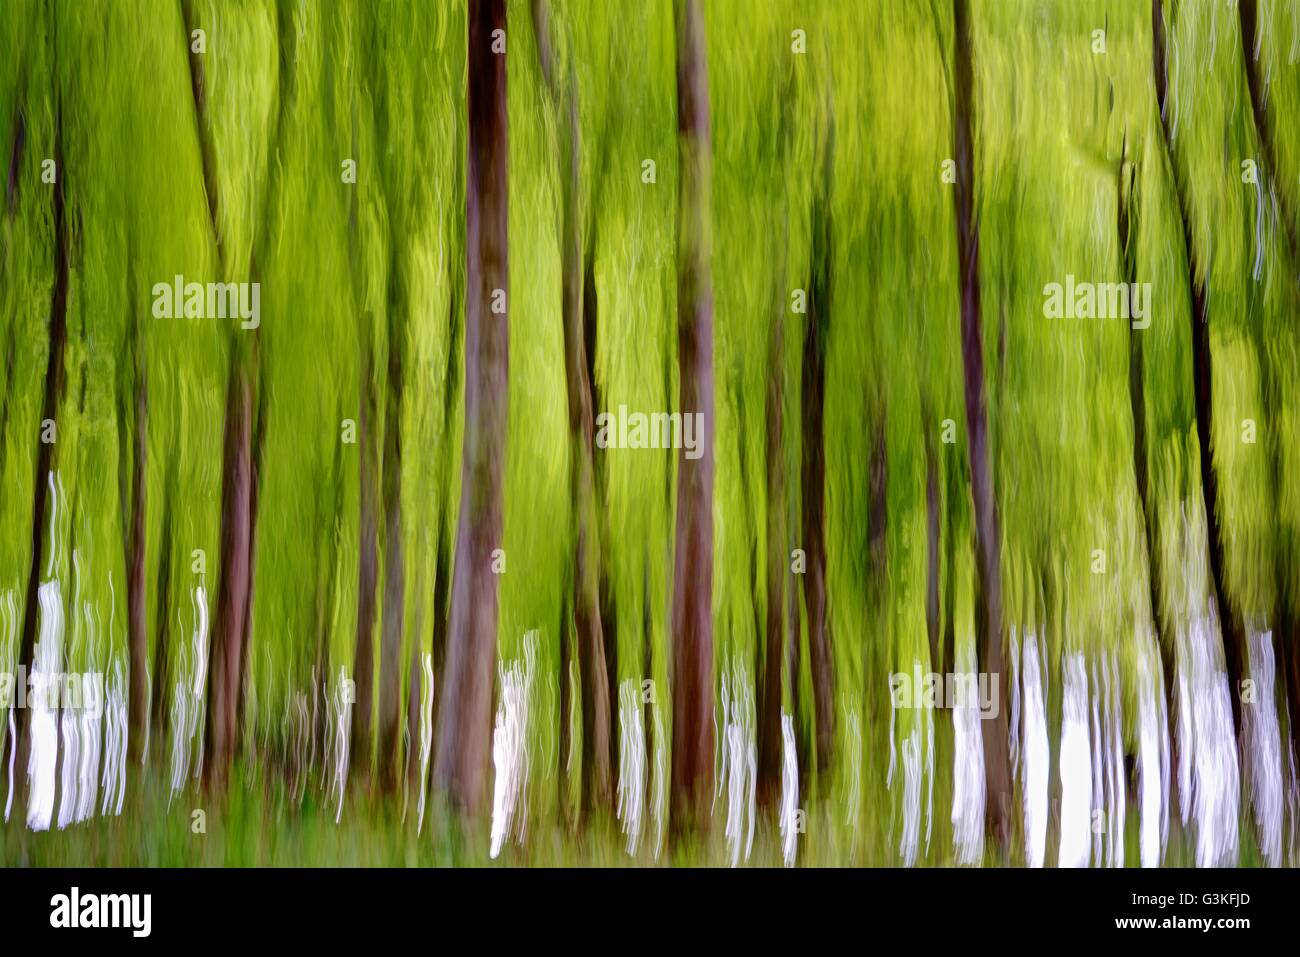 An abstract created by Intentional Camera Movement, ICM. Fresh Spring green woodland foliage blurred onto brown tree trunks Stock Photo